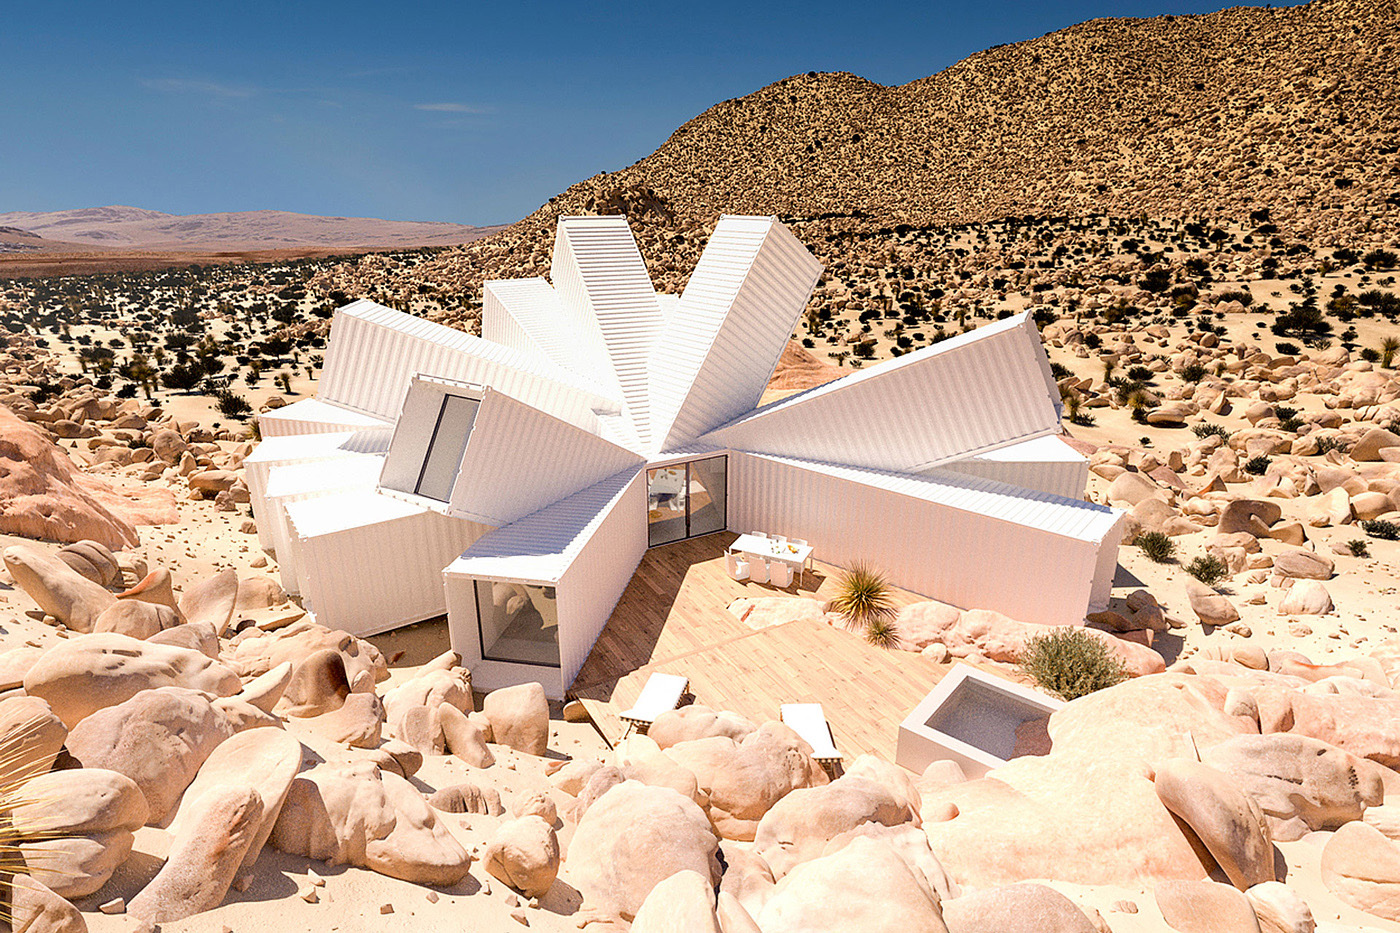 Joshua Tree Container House Made of White Cargo Containers